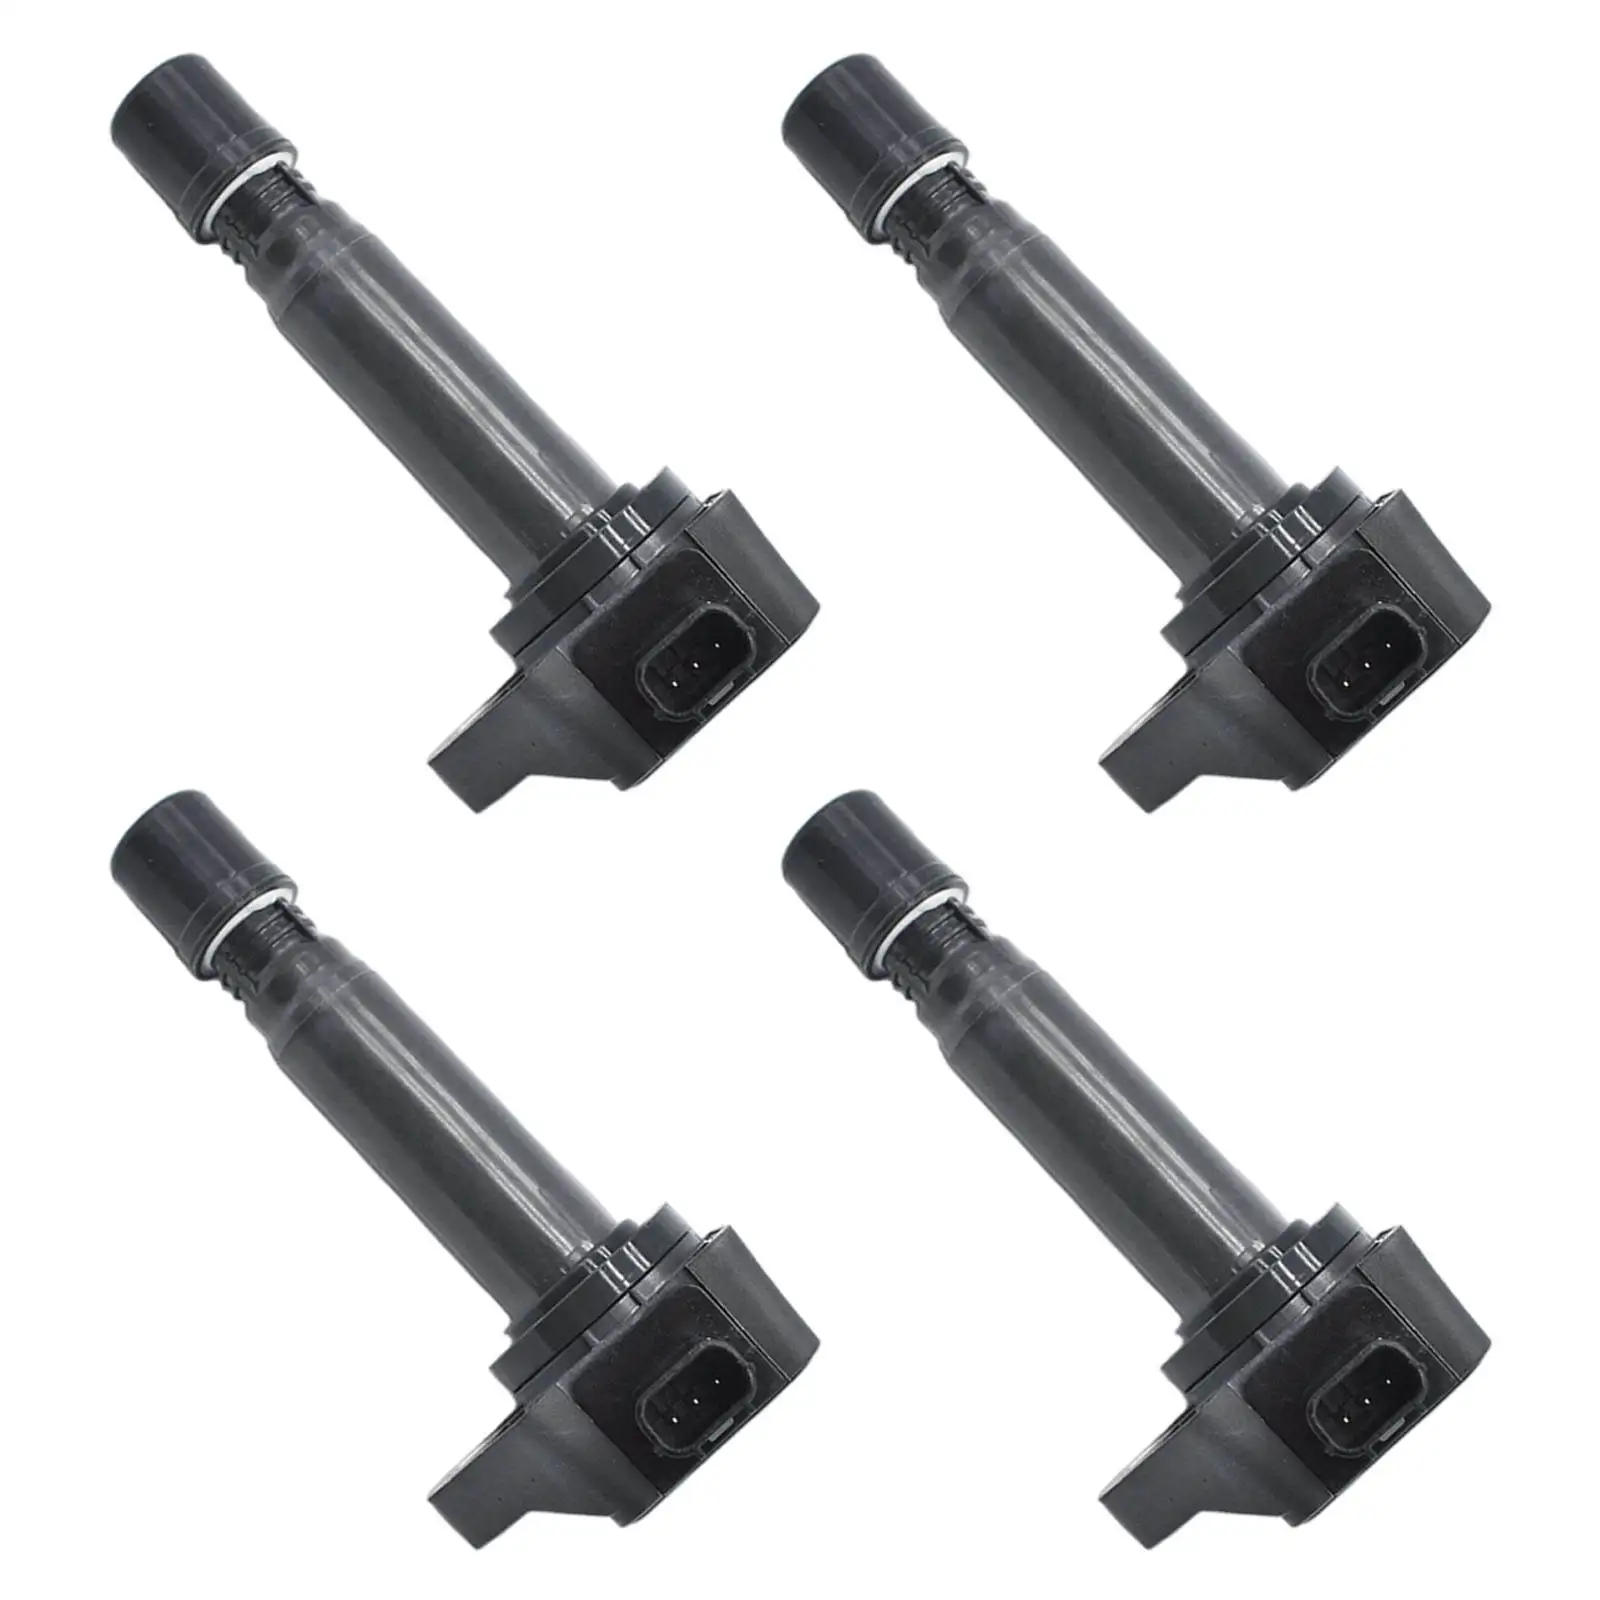 4Pcs Ignition Coil High Performance Hardware Plastic Vehicle Parts Car Supplies Replacement Fit for Honda 2.0L 2007-2011